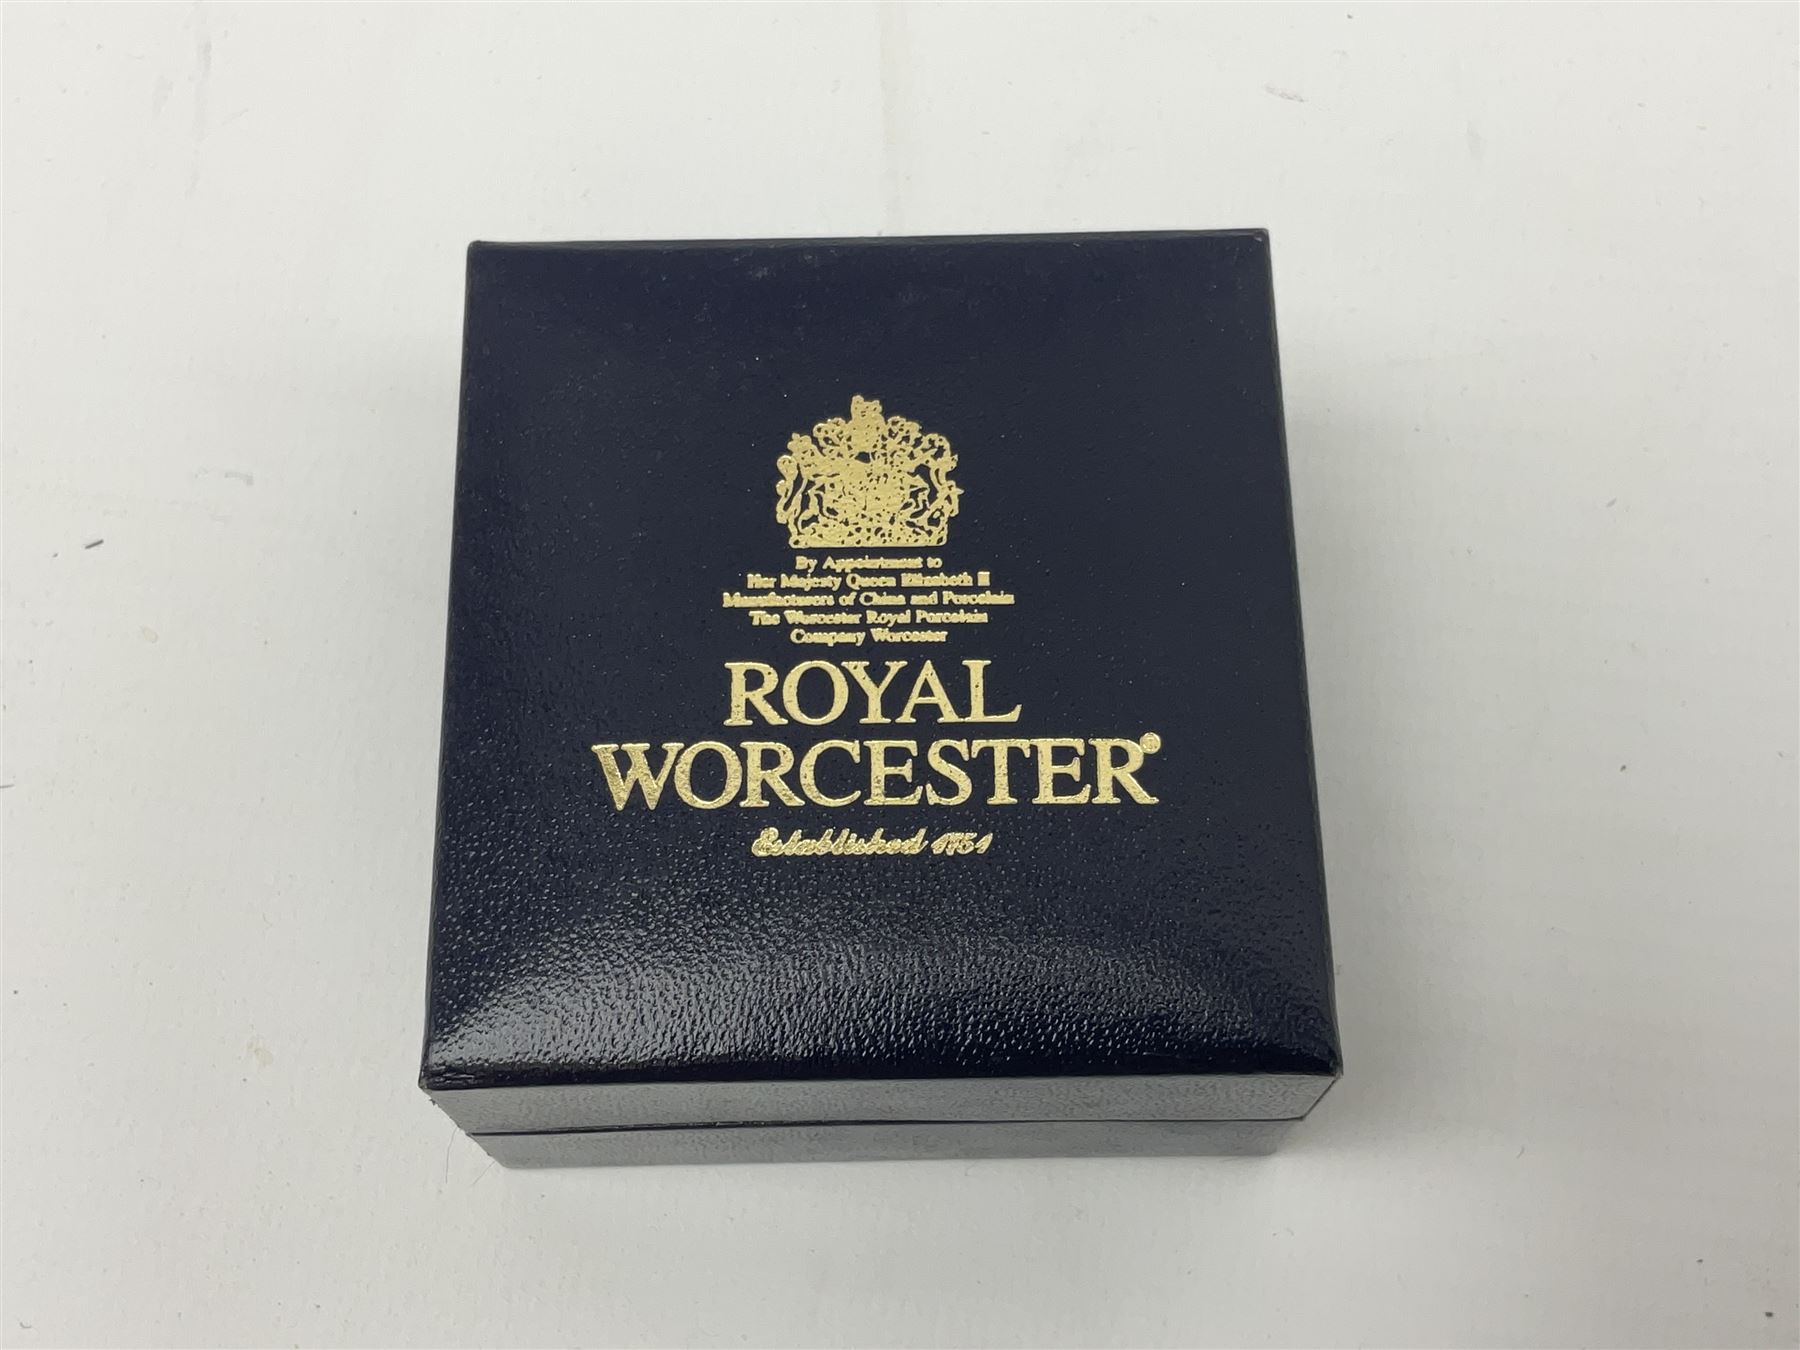 Royal Worcester porcelain pill box from The Connoisseur Collection ...